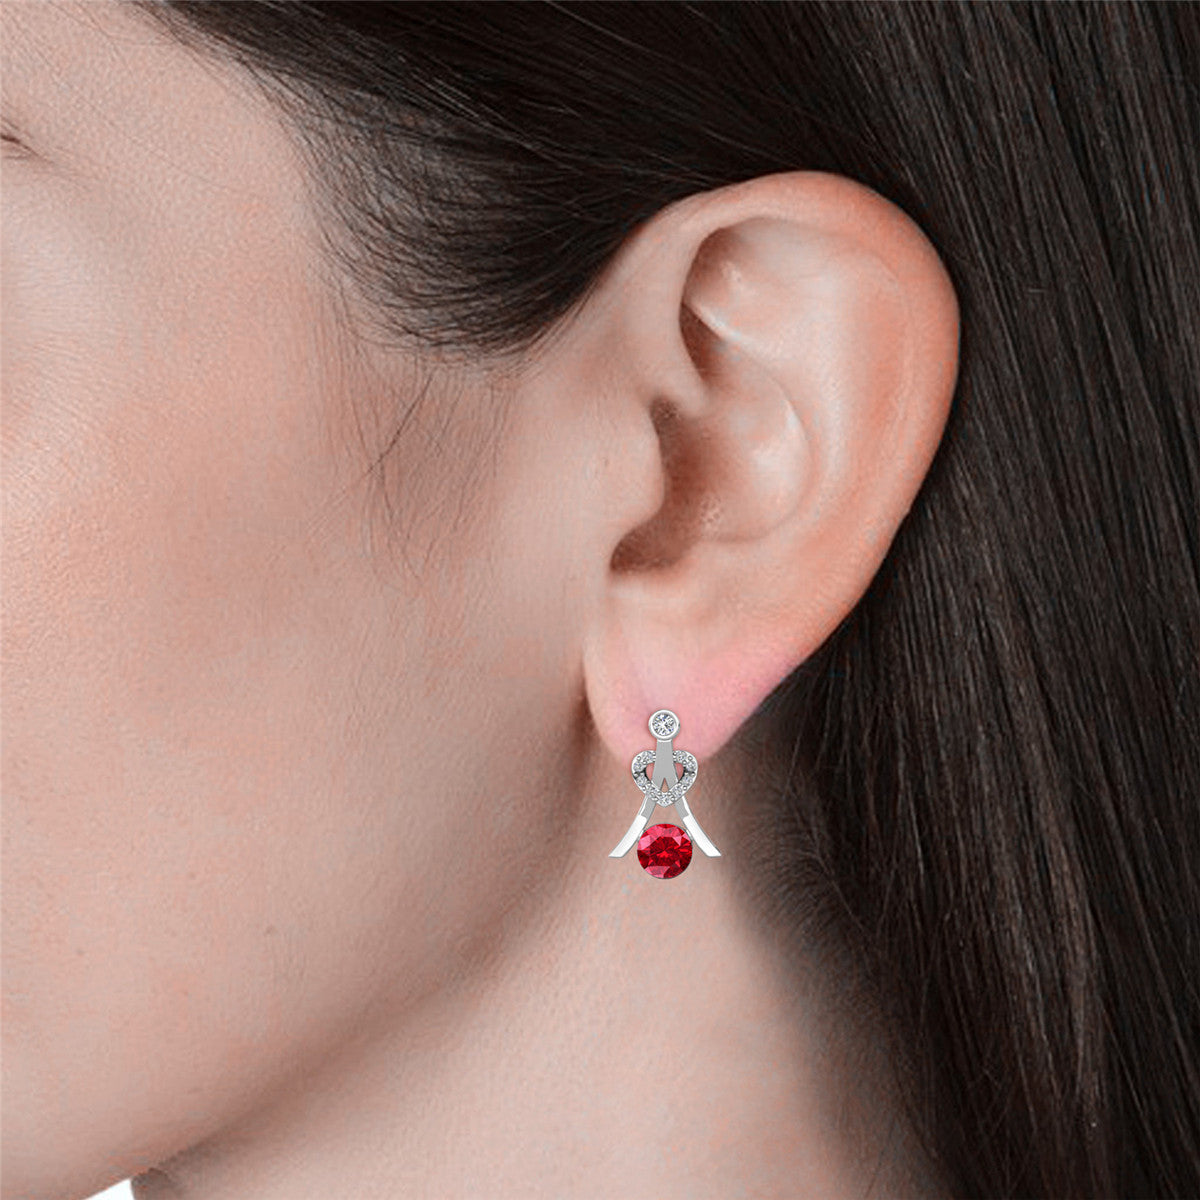 Serenity July Birthstone Ruby Earrings,  18k White Gold Plated Silver Earrings with Round Cut Crystals